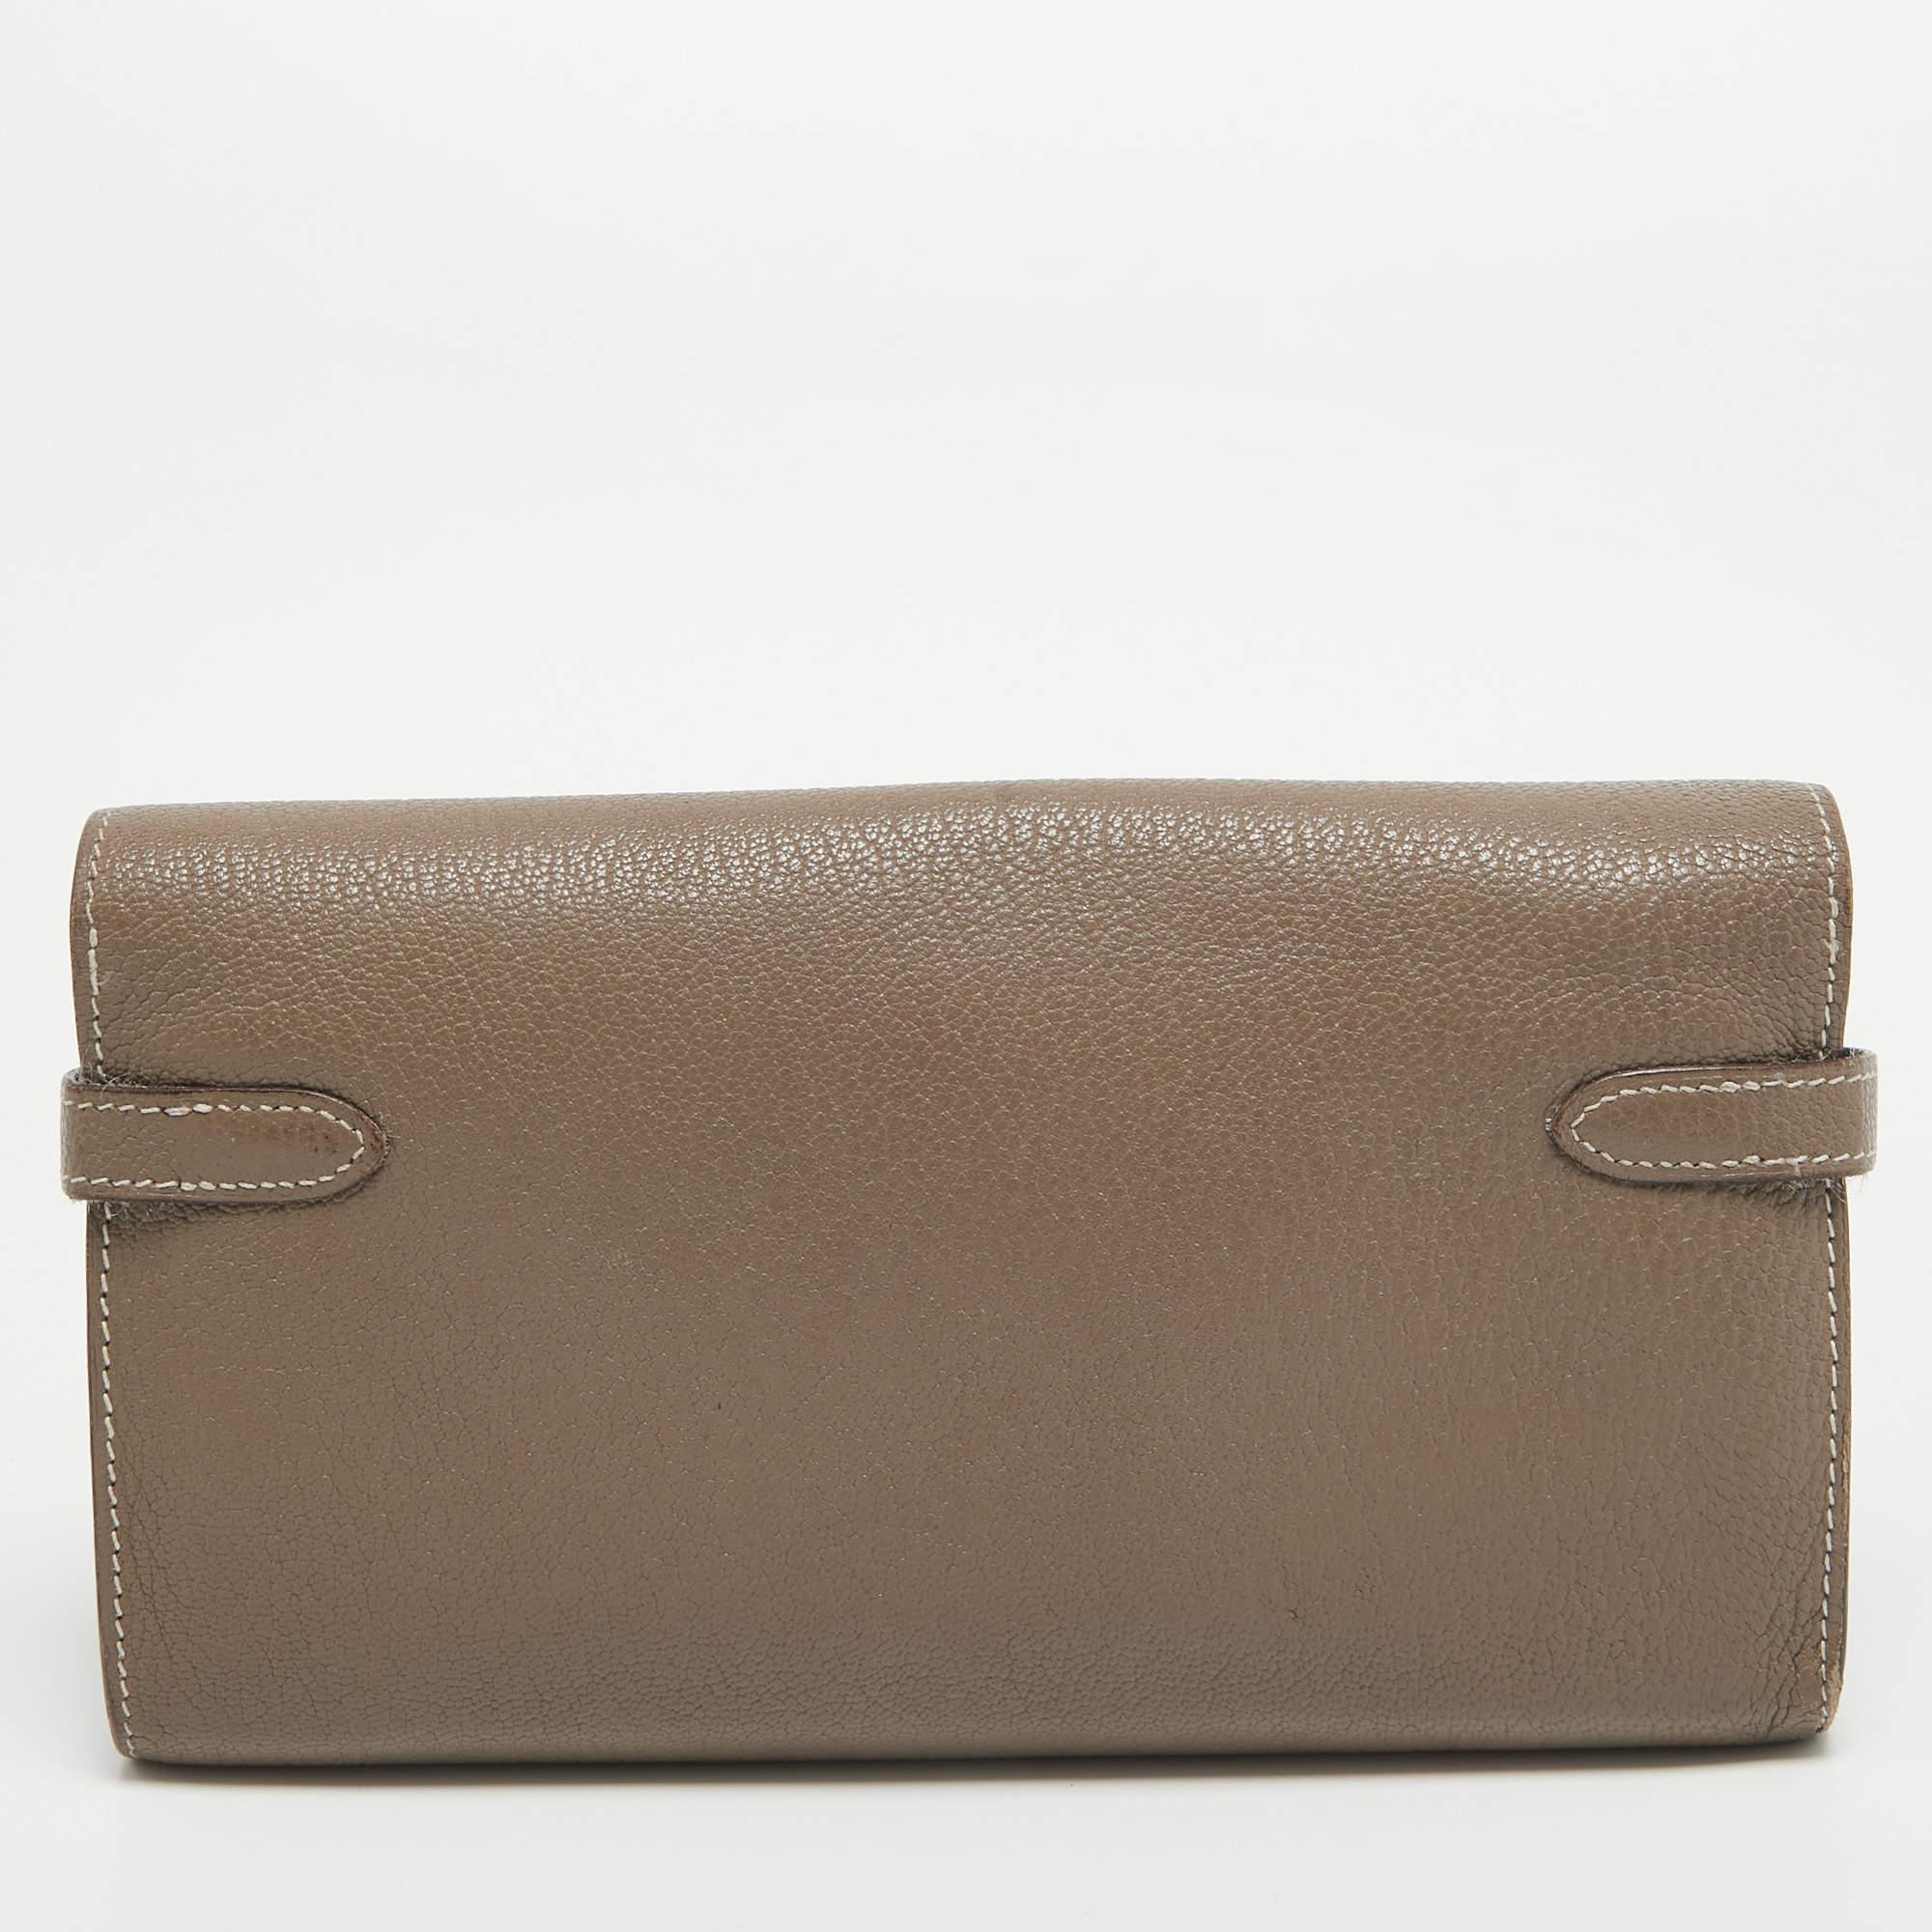 This classy Hermes Kelly Classic wallet brings along a touch of luxury and immense style. It comes perfectly crafted to neatly carry your cards and cash.

